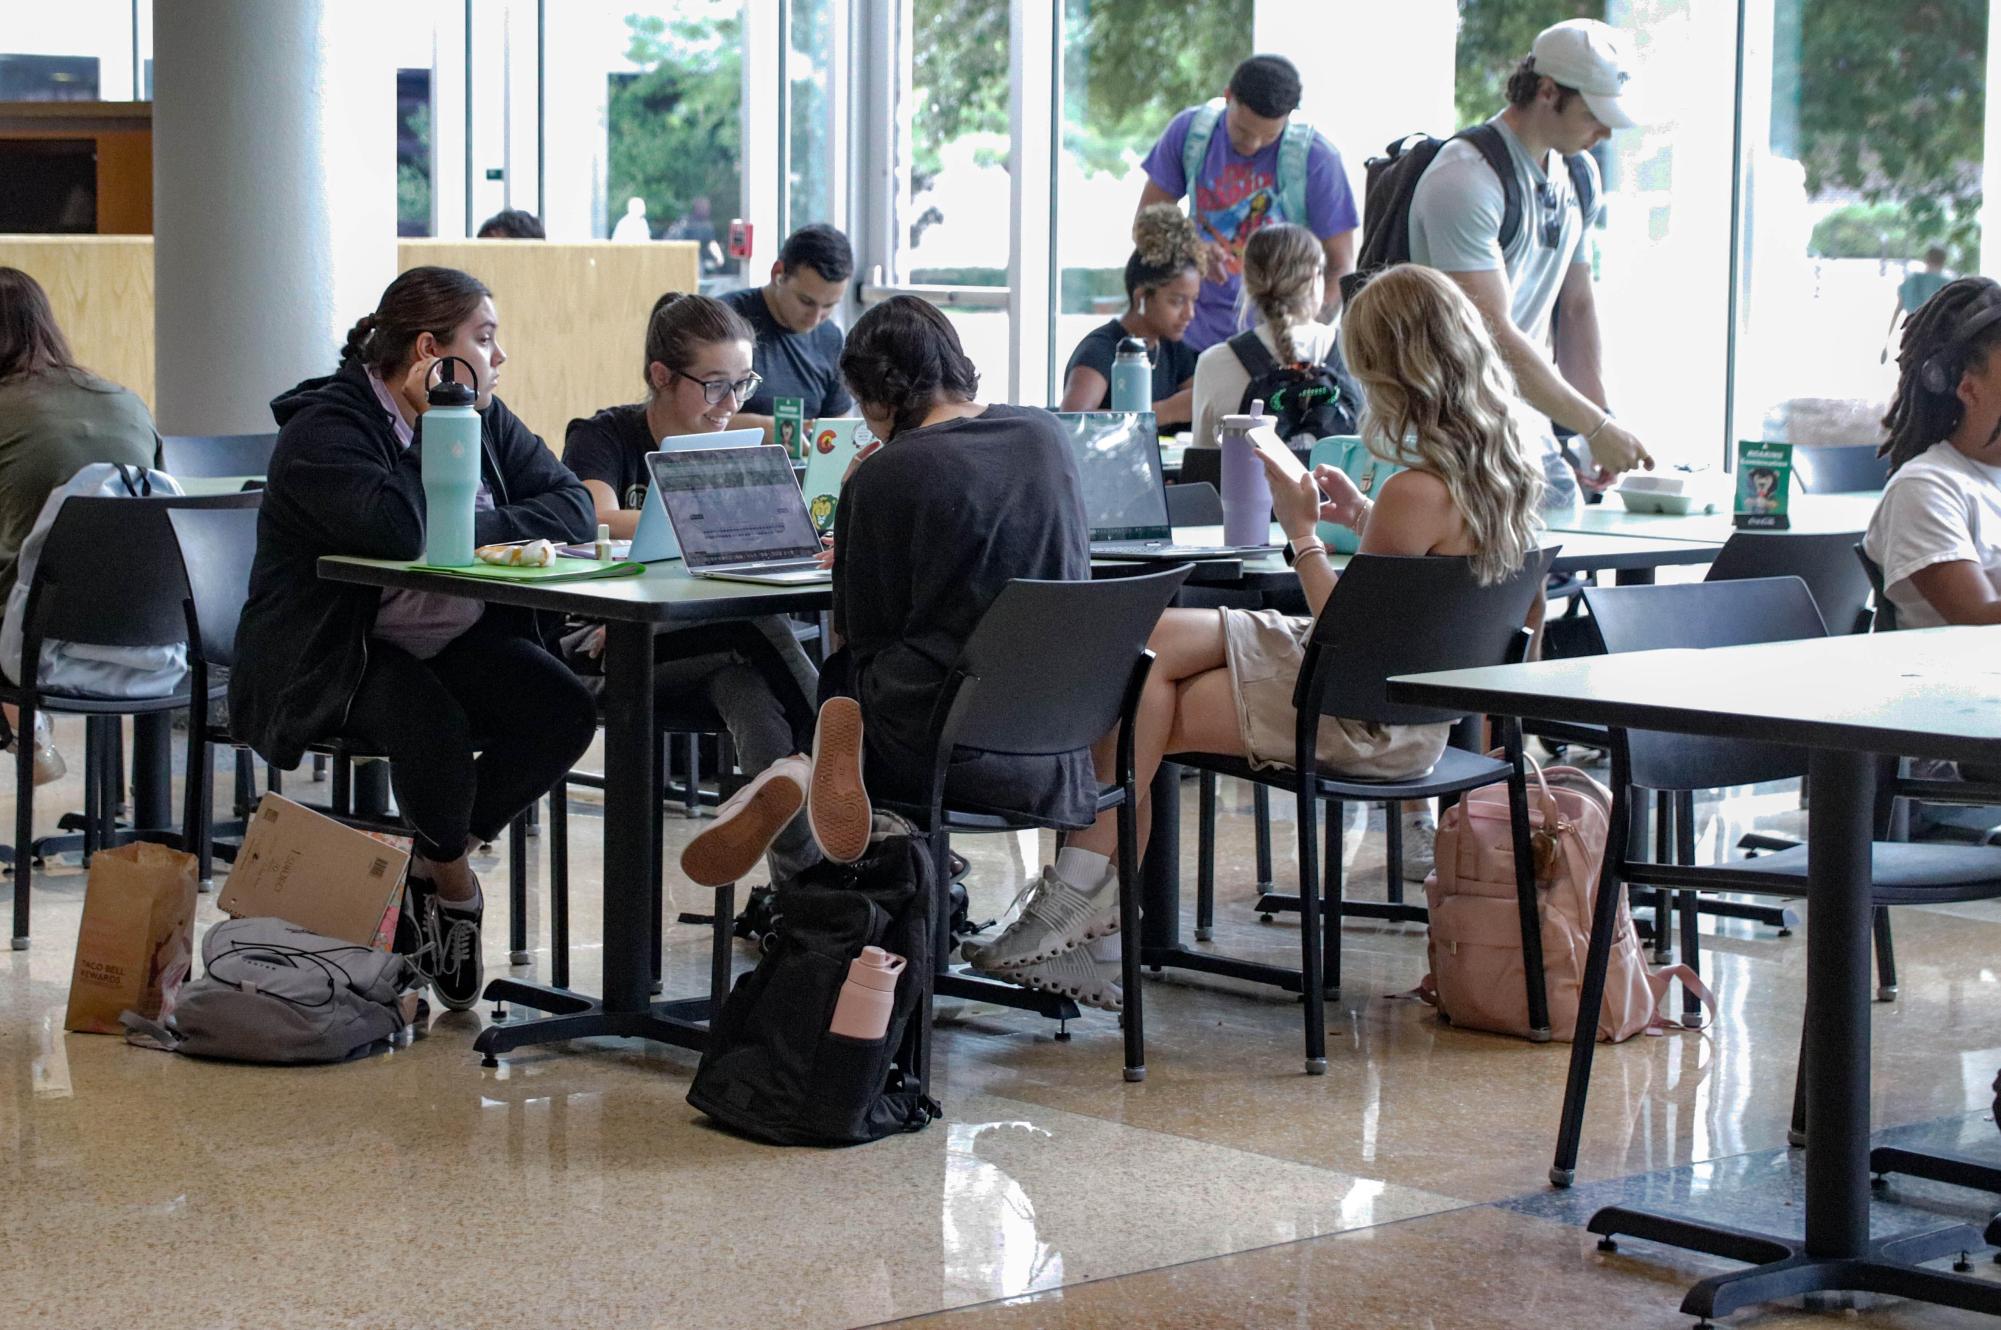 A group of students multi-tasking in the union as they chat and work on their laptops.